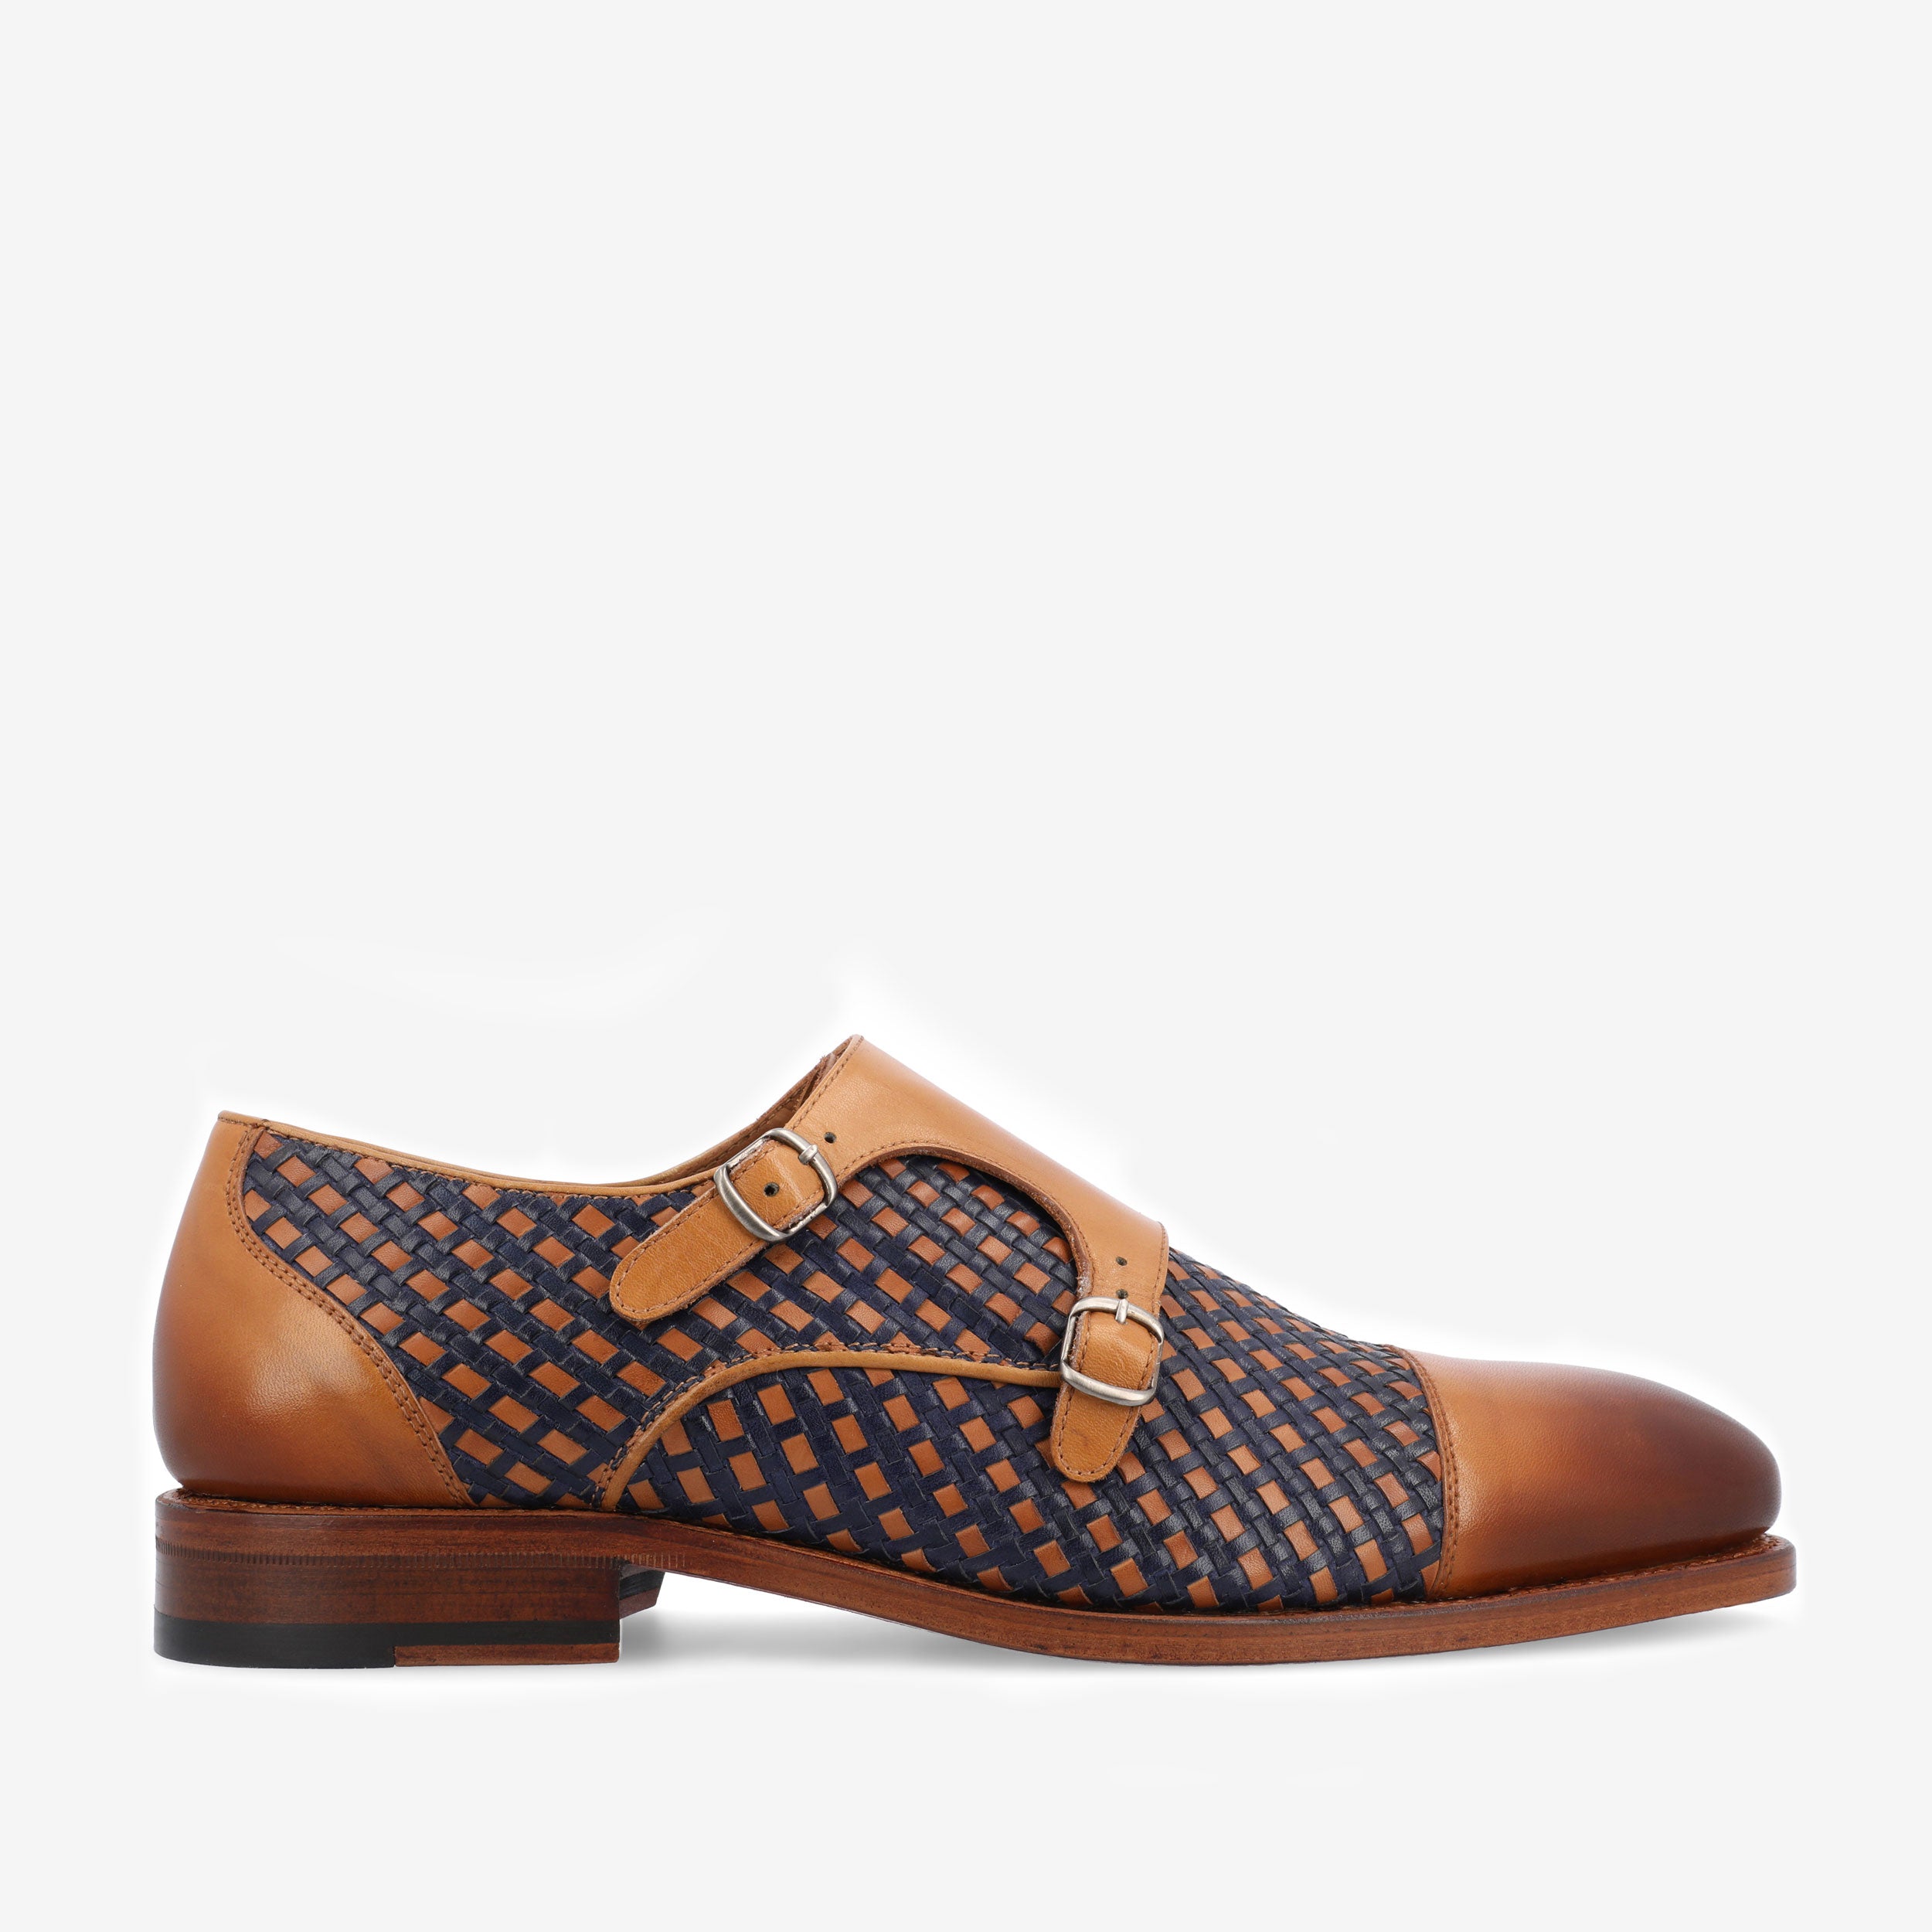 The Lucca Monk Woven in Navy (Last Chance, Final Sale)